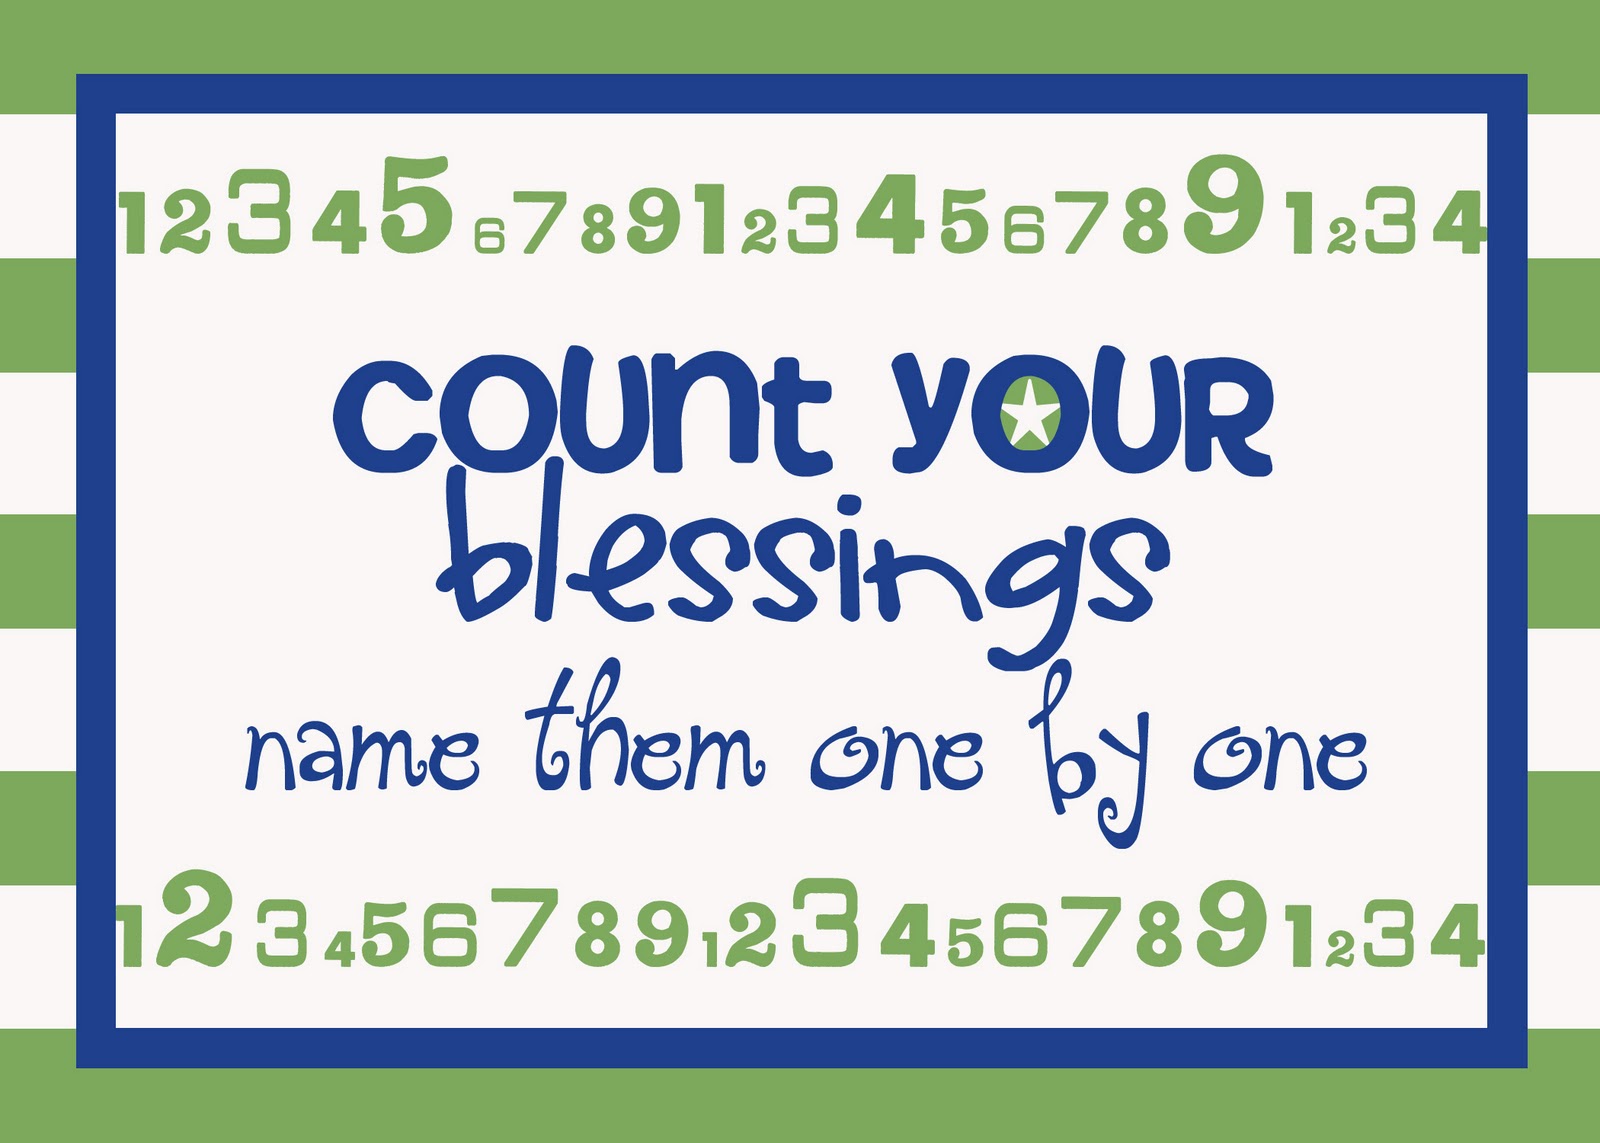 It S The Metaphor Speaking   Count Your Blessings  With A Calculator